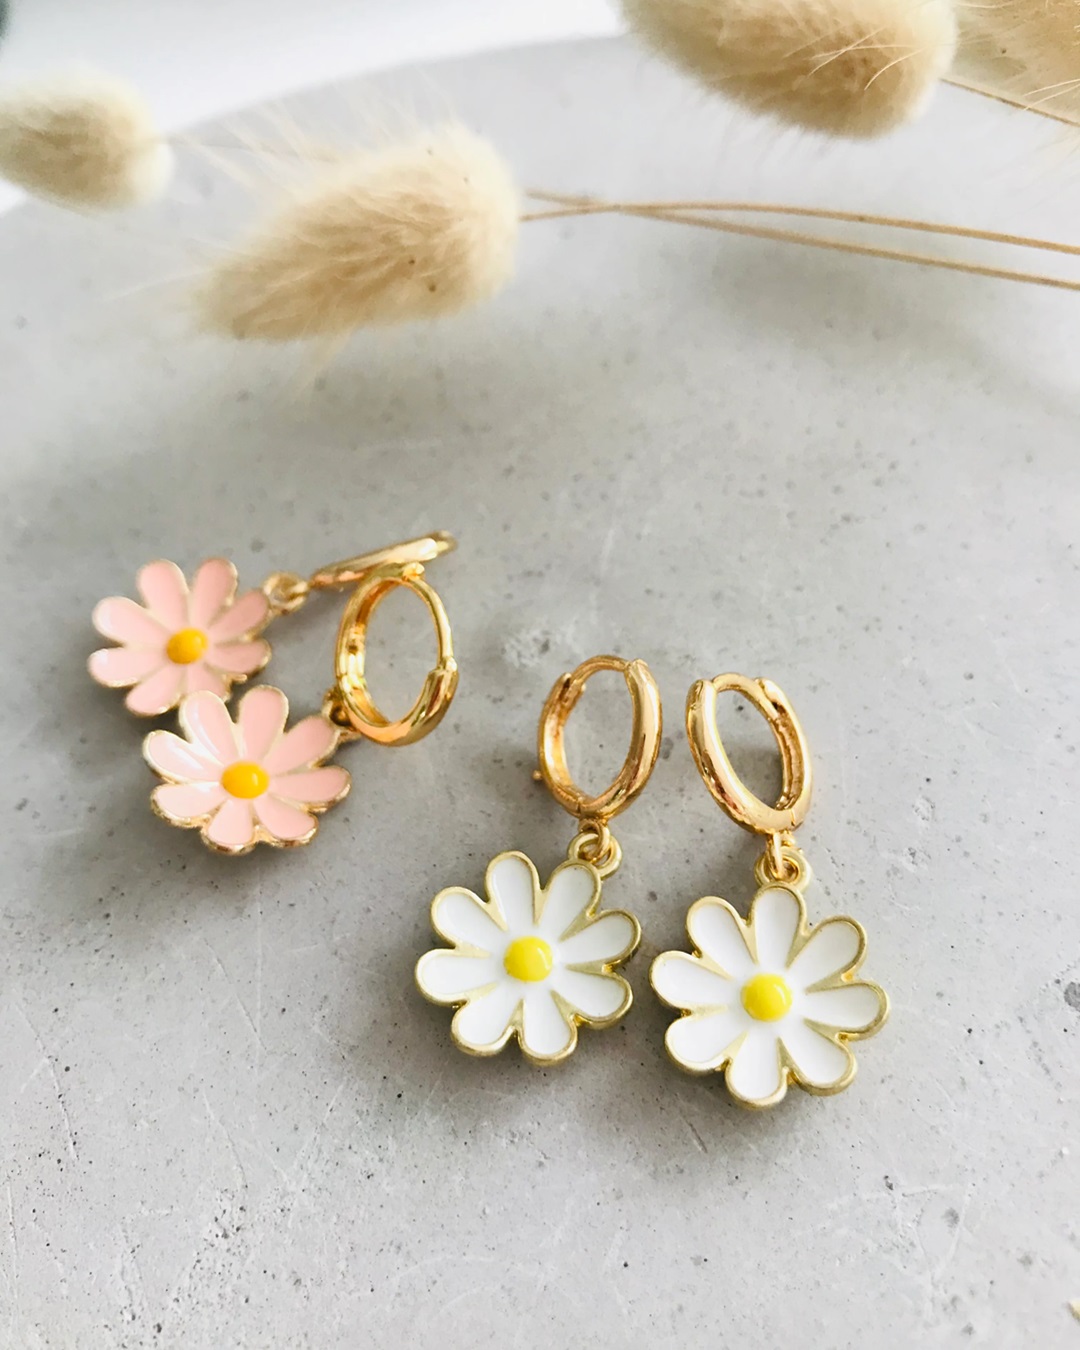 Pink and white daisy earring with gold hoops